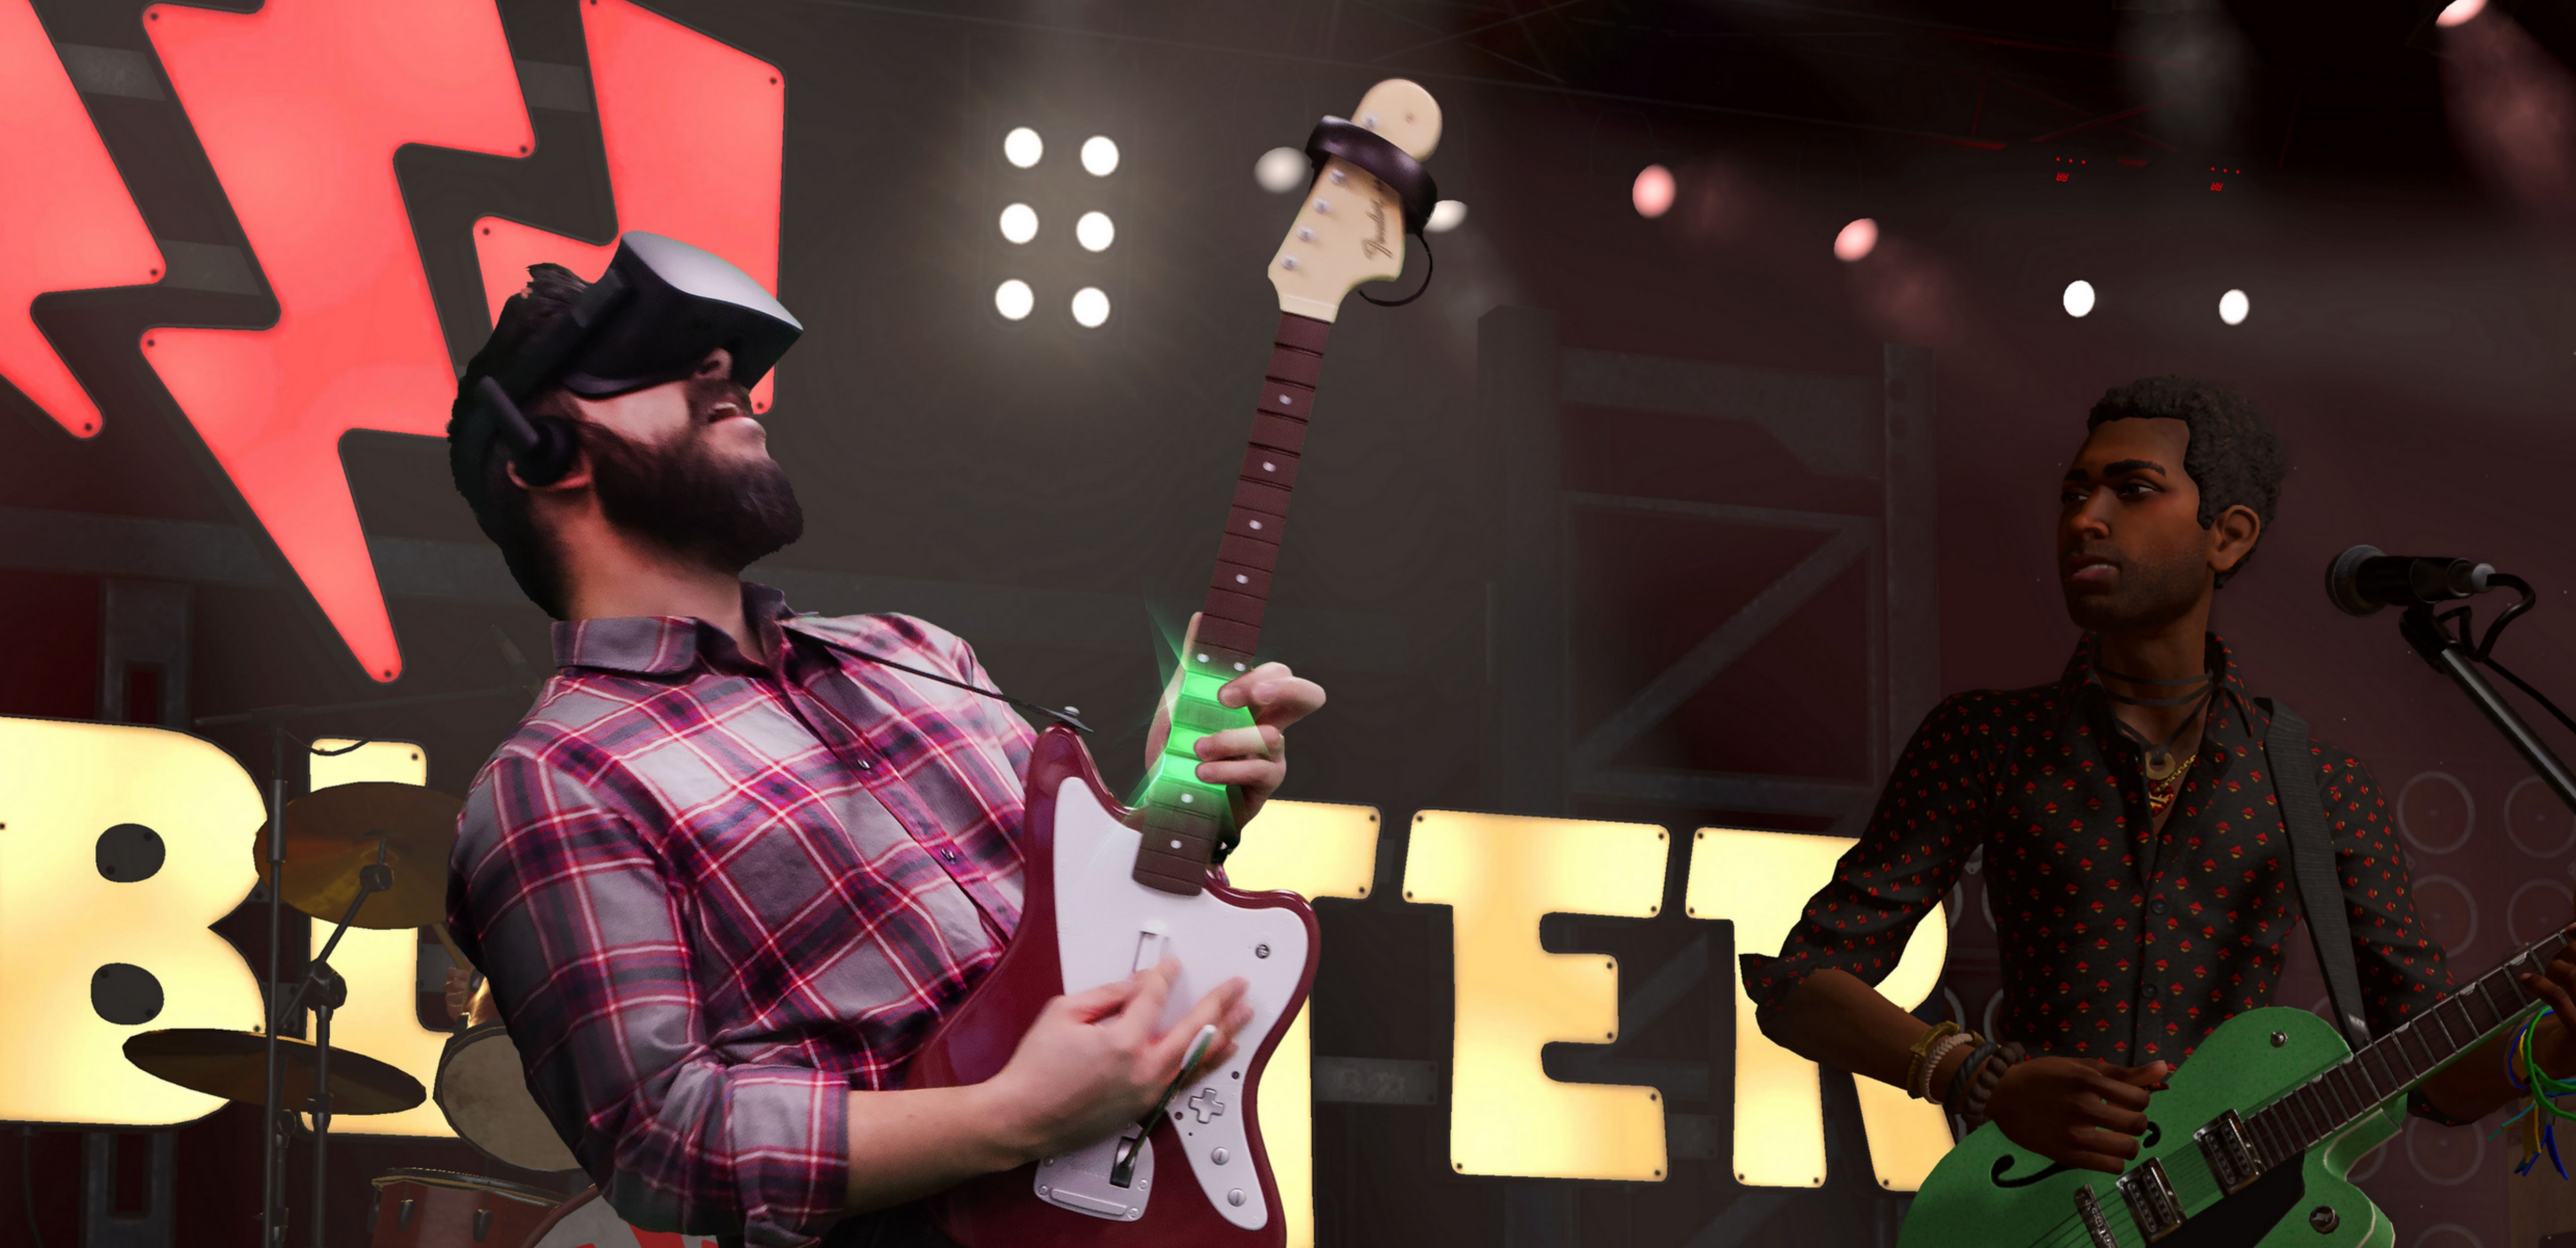 Channel your inner rock star and let Rock Band VR transport you onstage to perform in front of a sold-out crowd.